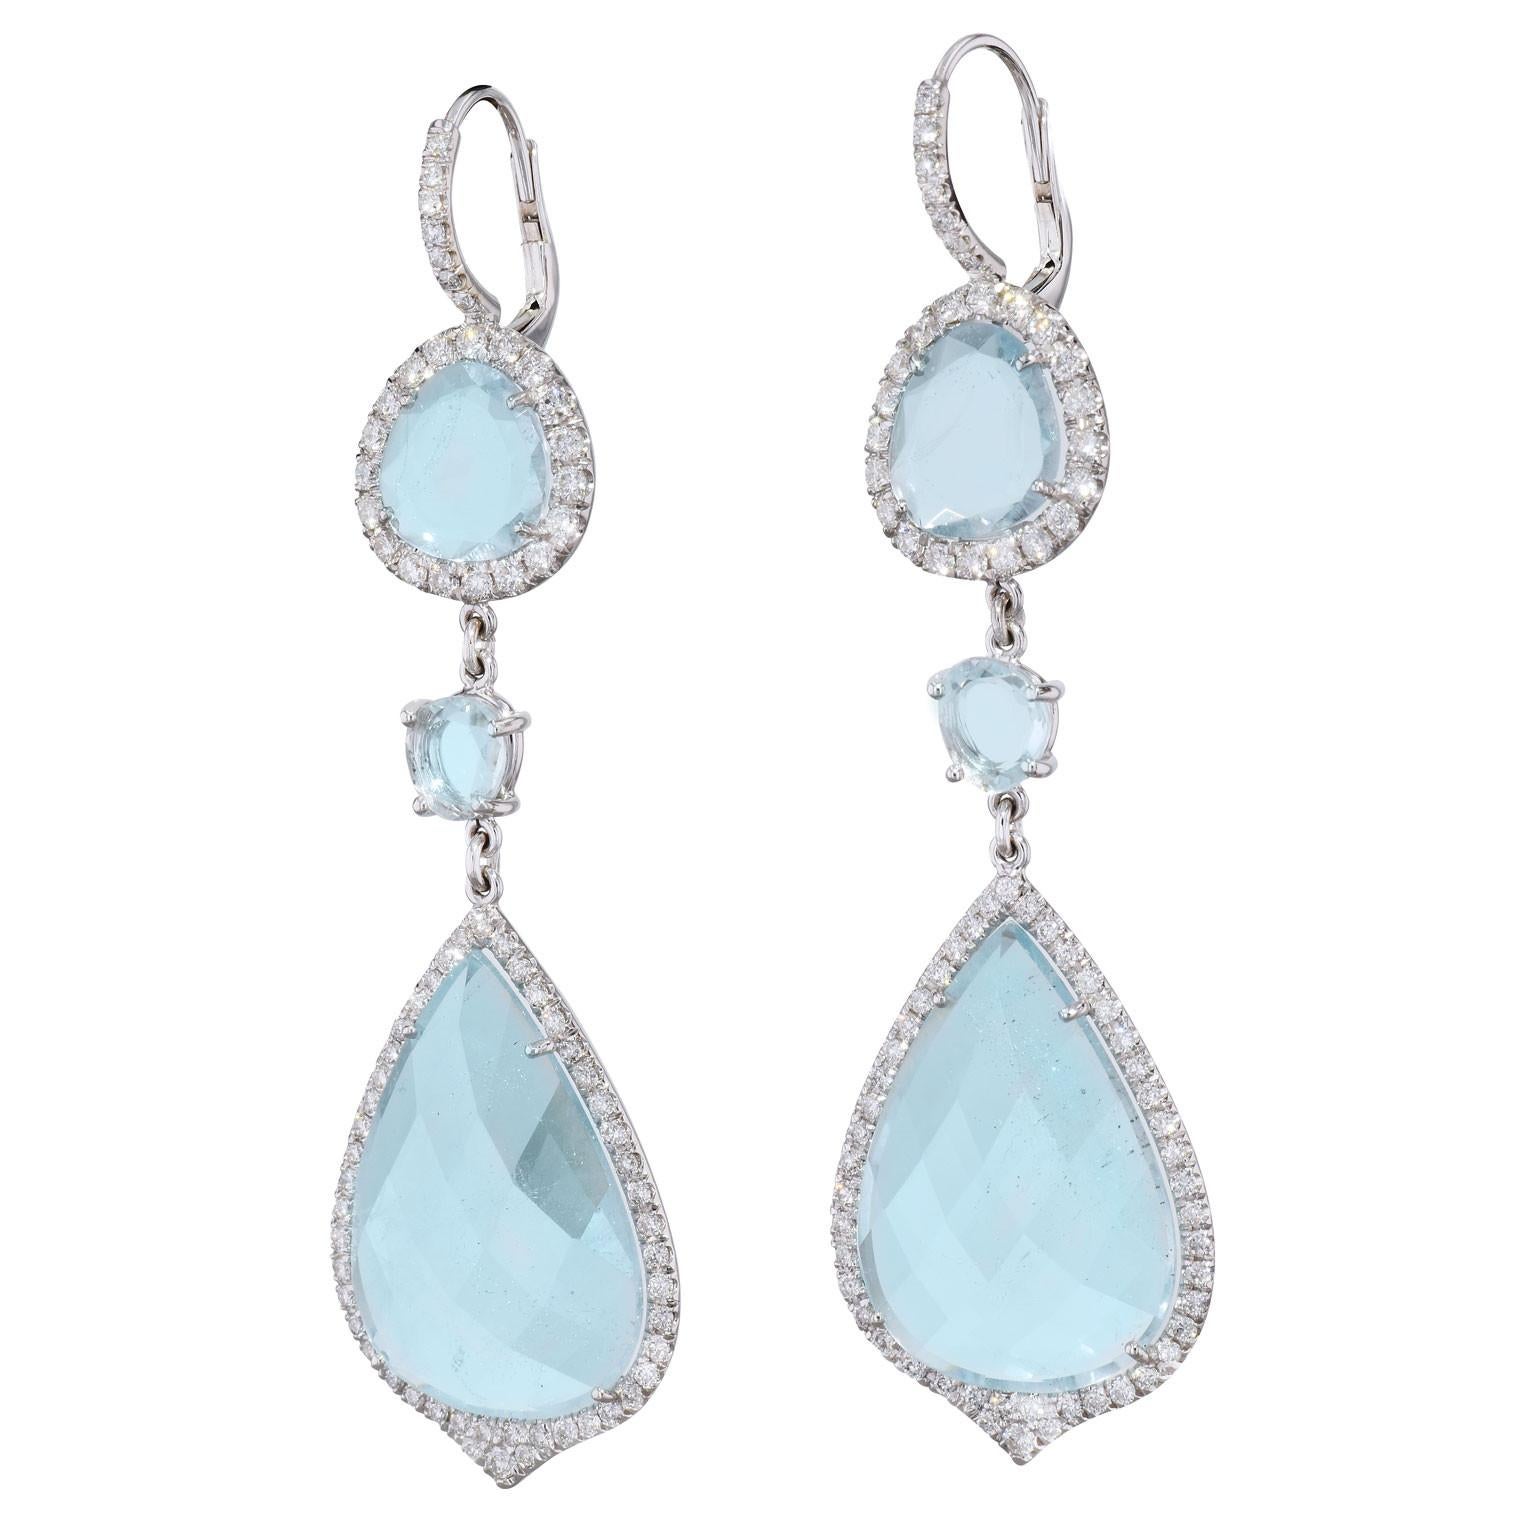 Handmade Drop Blue Topaz Slice Earrings 18kt Gold

Handmade Blue Topaz Slice Earrings. The topaz's have a total weight of 37.42 carats and are surrounded by 1.81 carat round brilliant cut diamond pave set G/H I1. 